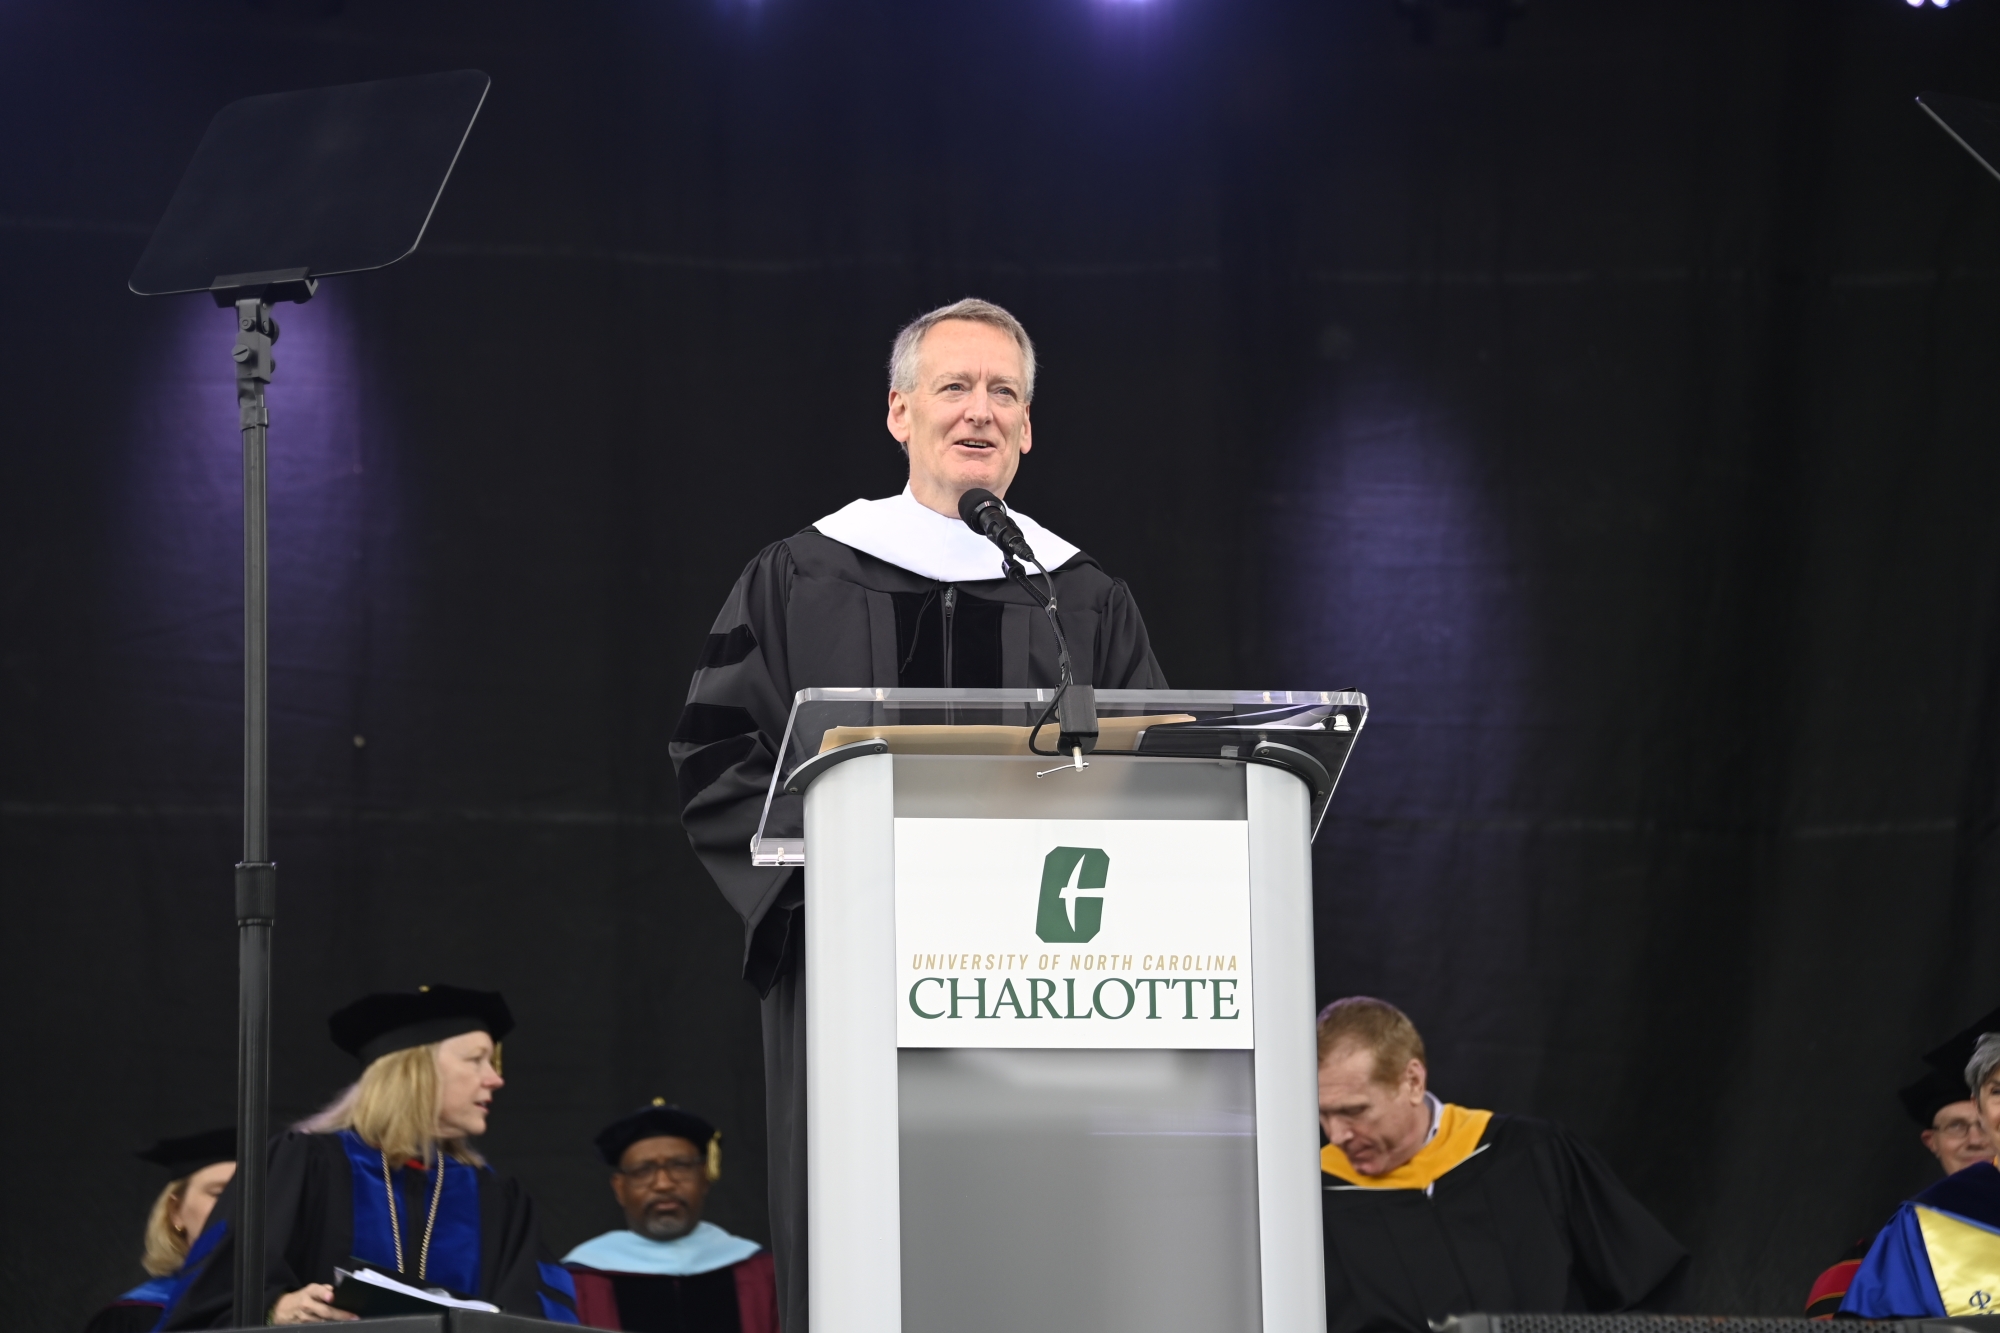 Joe Price ‘83 received an honorary doctorate in public service during UNC Charlotte’s Spring Commencement ceremonies.